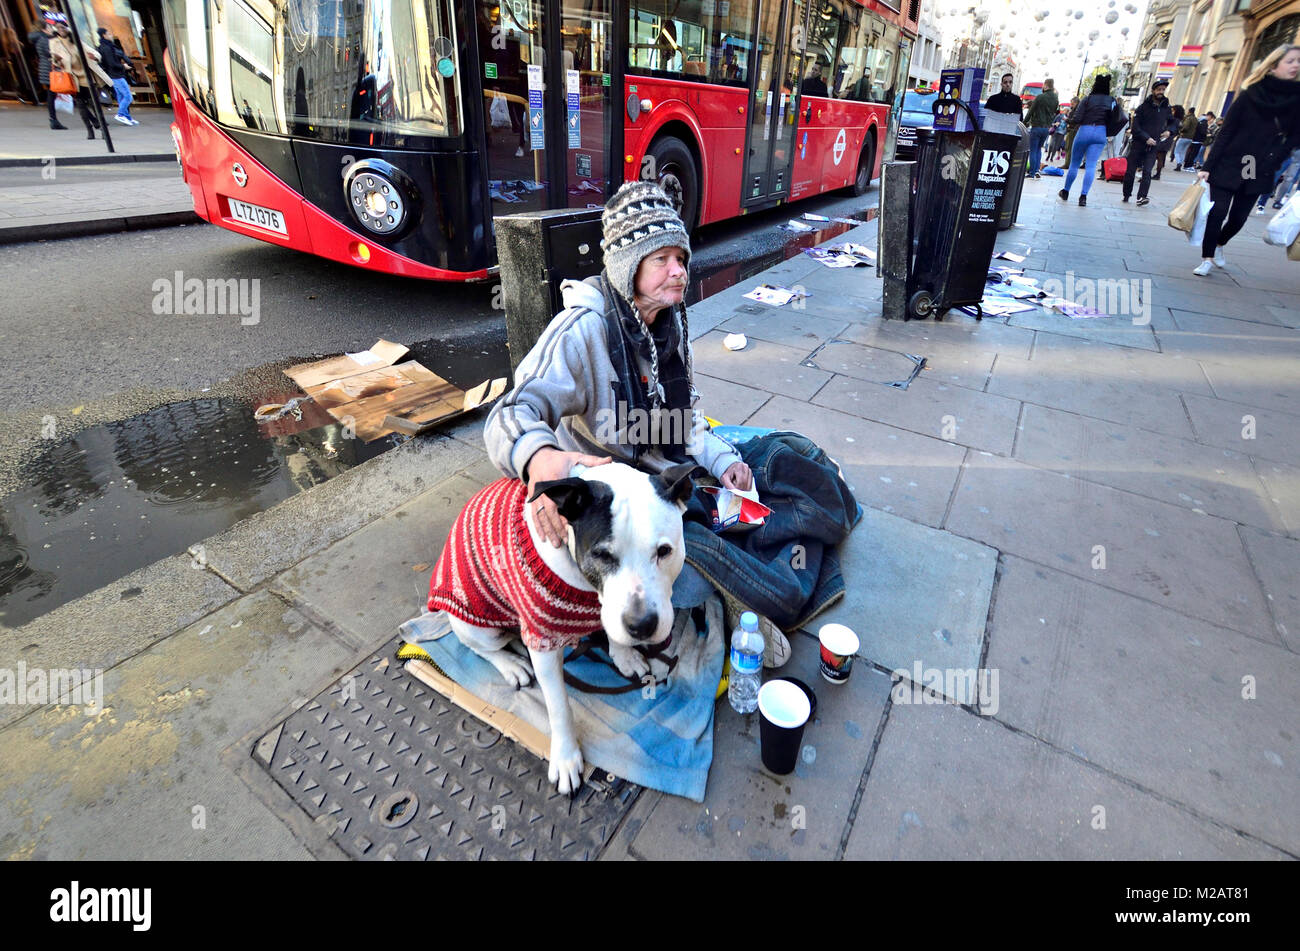 London, England, UK. Homeless man with his dog in Oxford Street Stock Photo